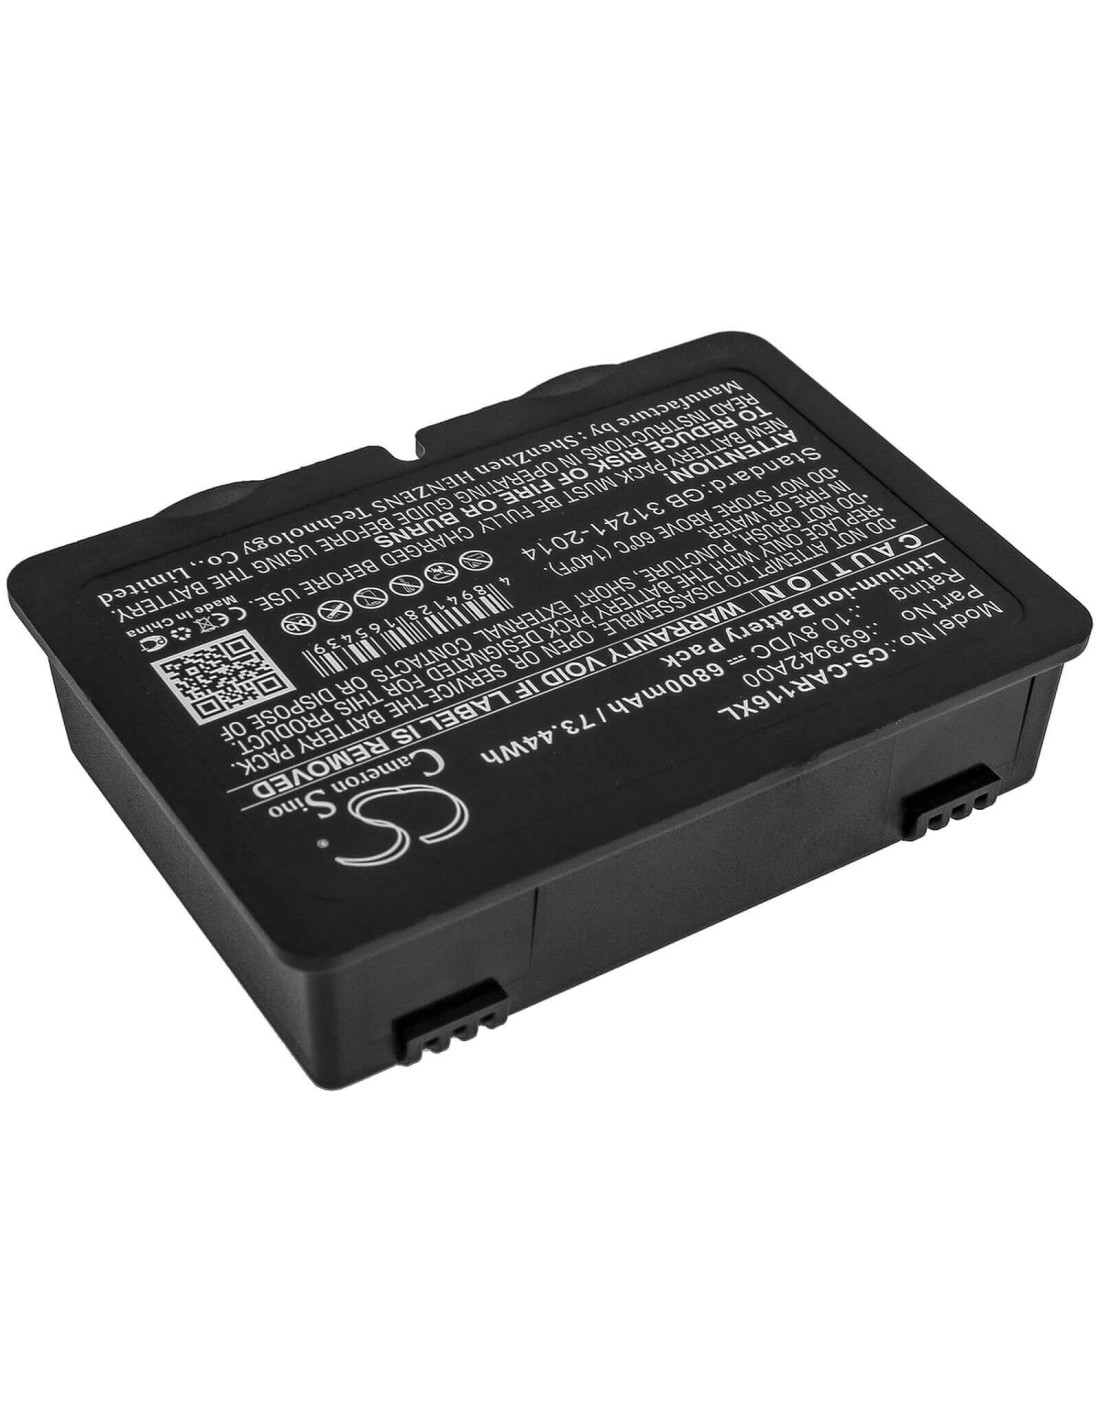 Battery for Chauvin Arnoux, C.a 6116n, C.a 6117 10.8V, 6800mAh - 73.44Wh